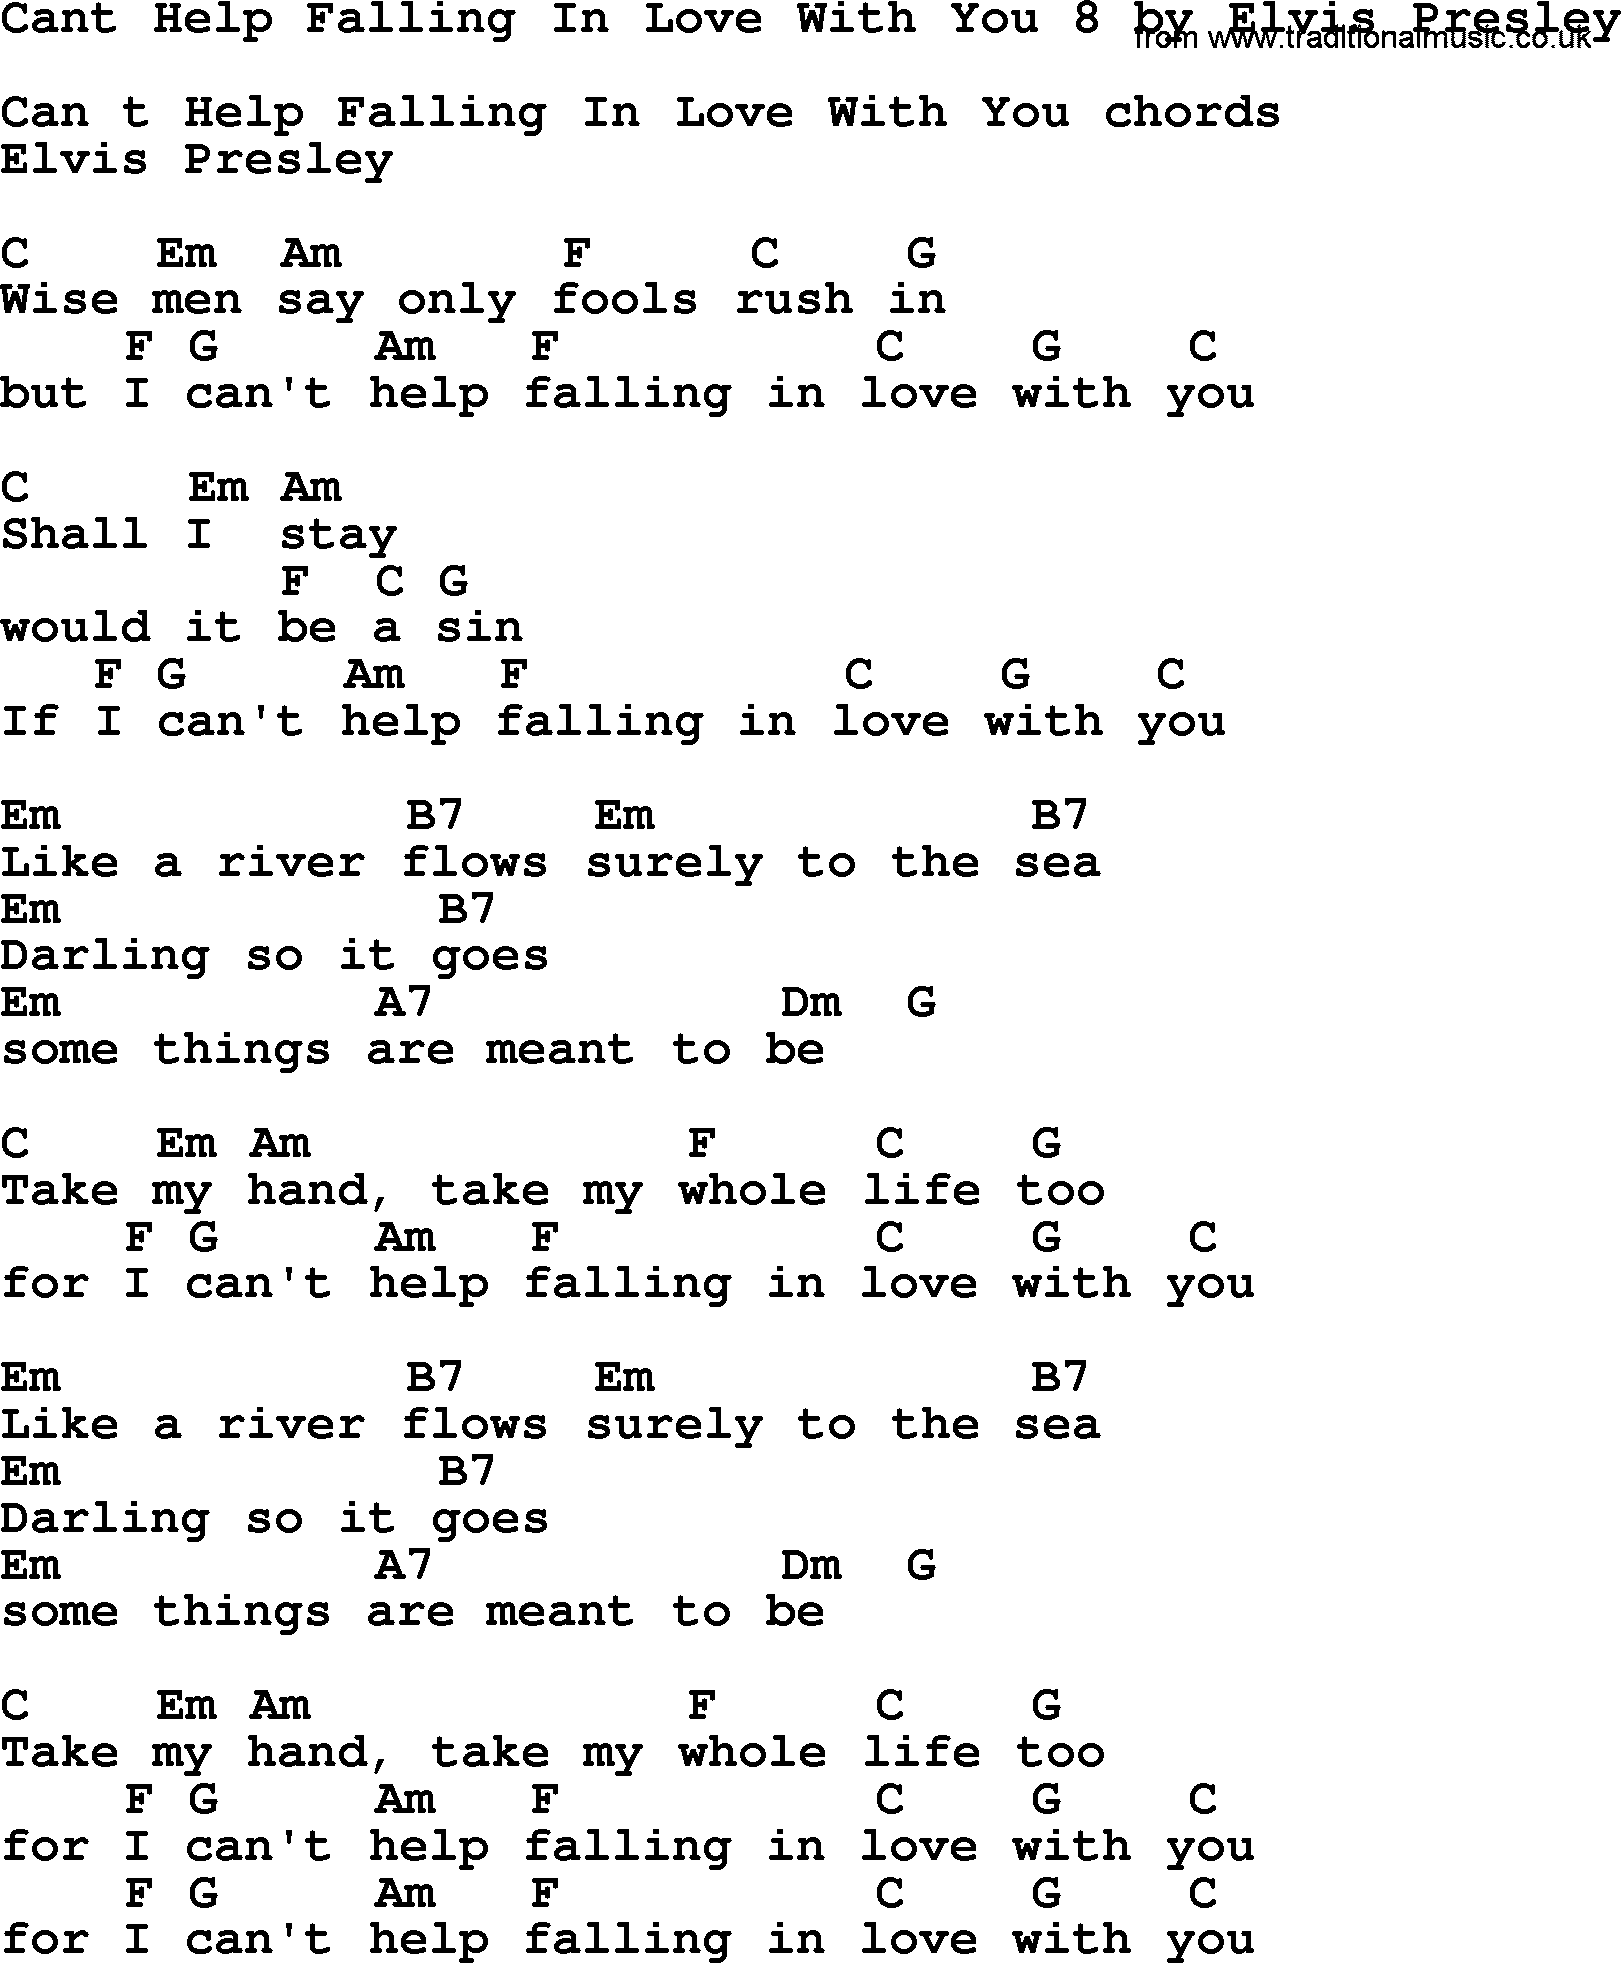 Elvis Presley song: Cant Help Falling In Love With You 8, lyrics and chords